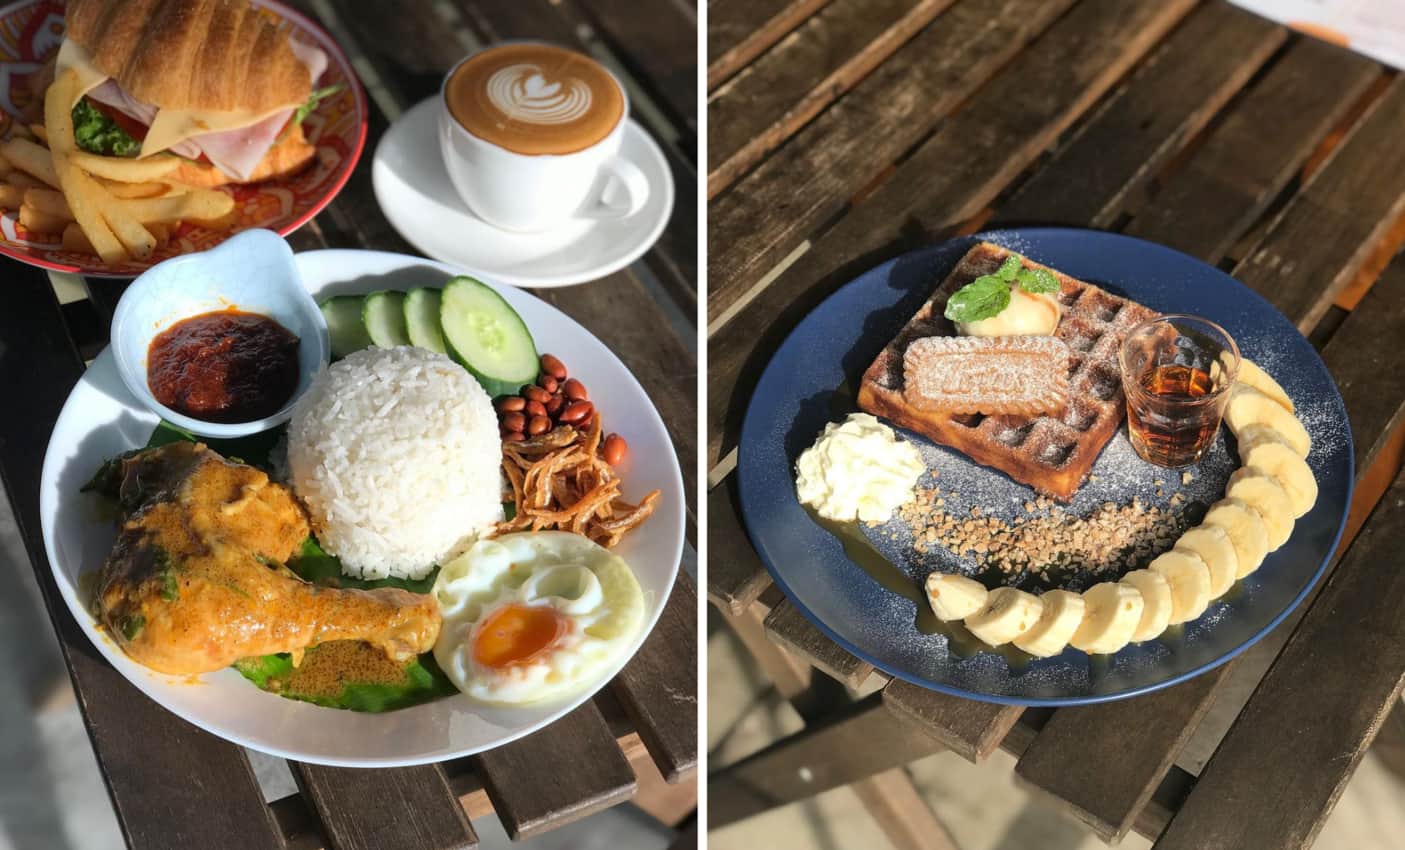 Cafes in Puchong - Haus 7 Cafe